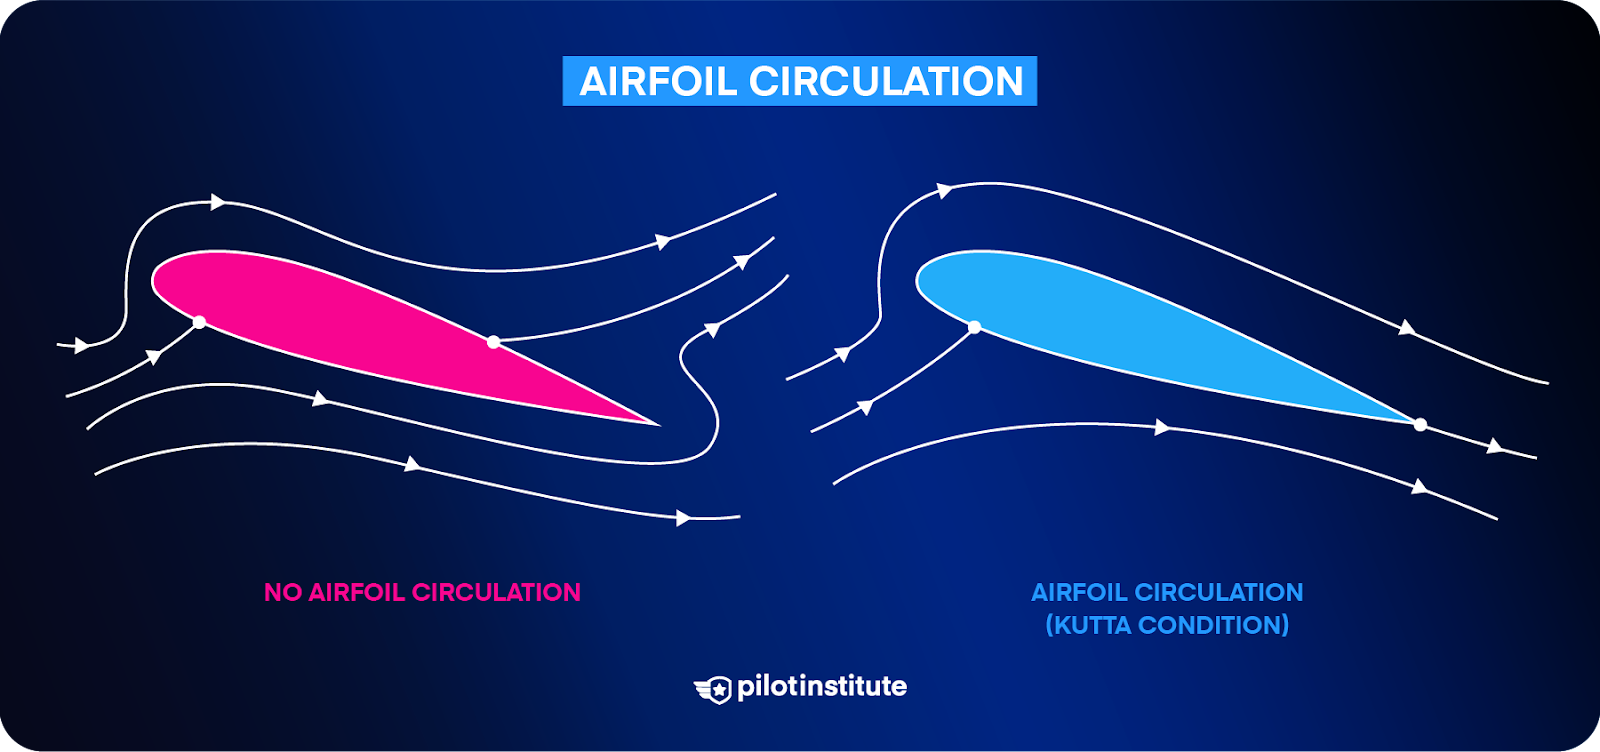 A diagram showing circulation around an airfoil (Kutta condition).